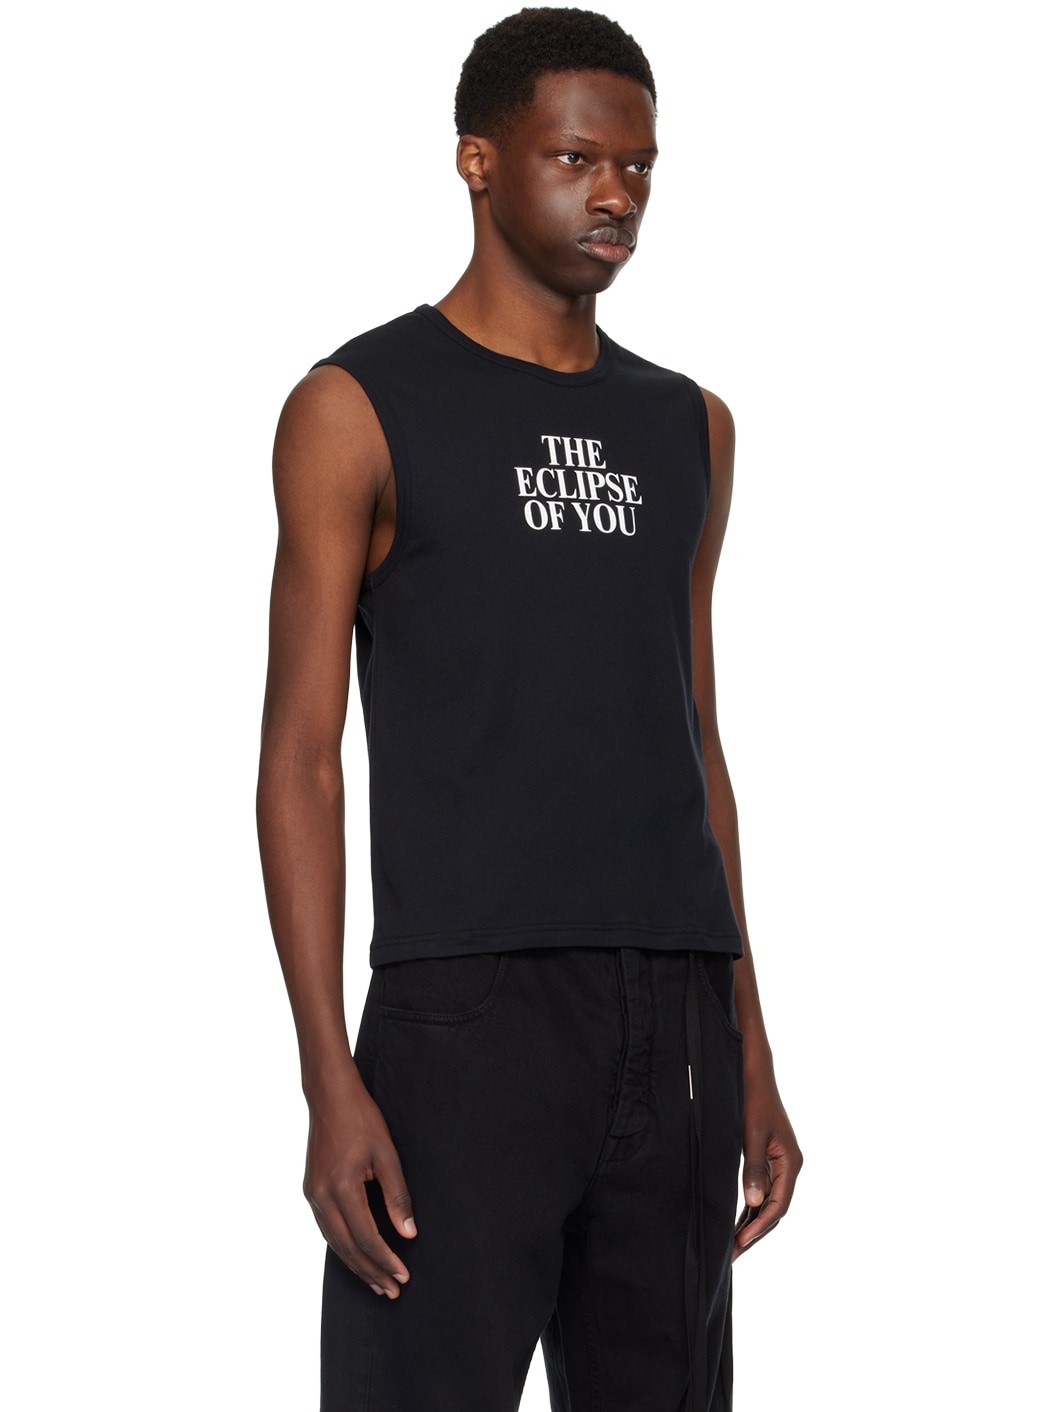 Black 'Eclipse Of You' Tank Top - 2